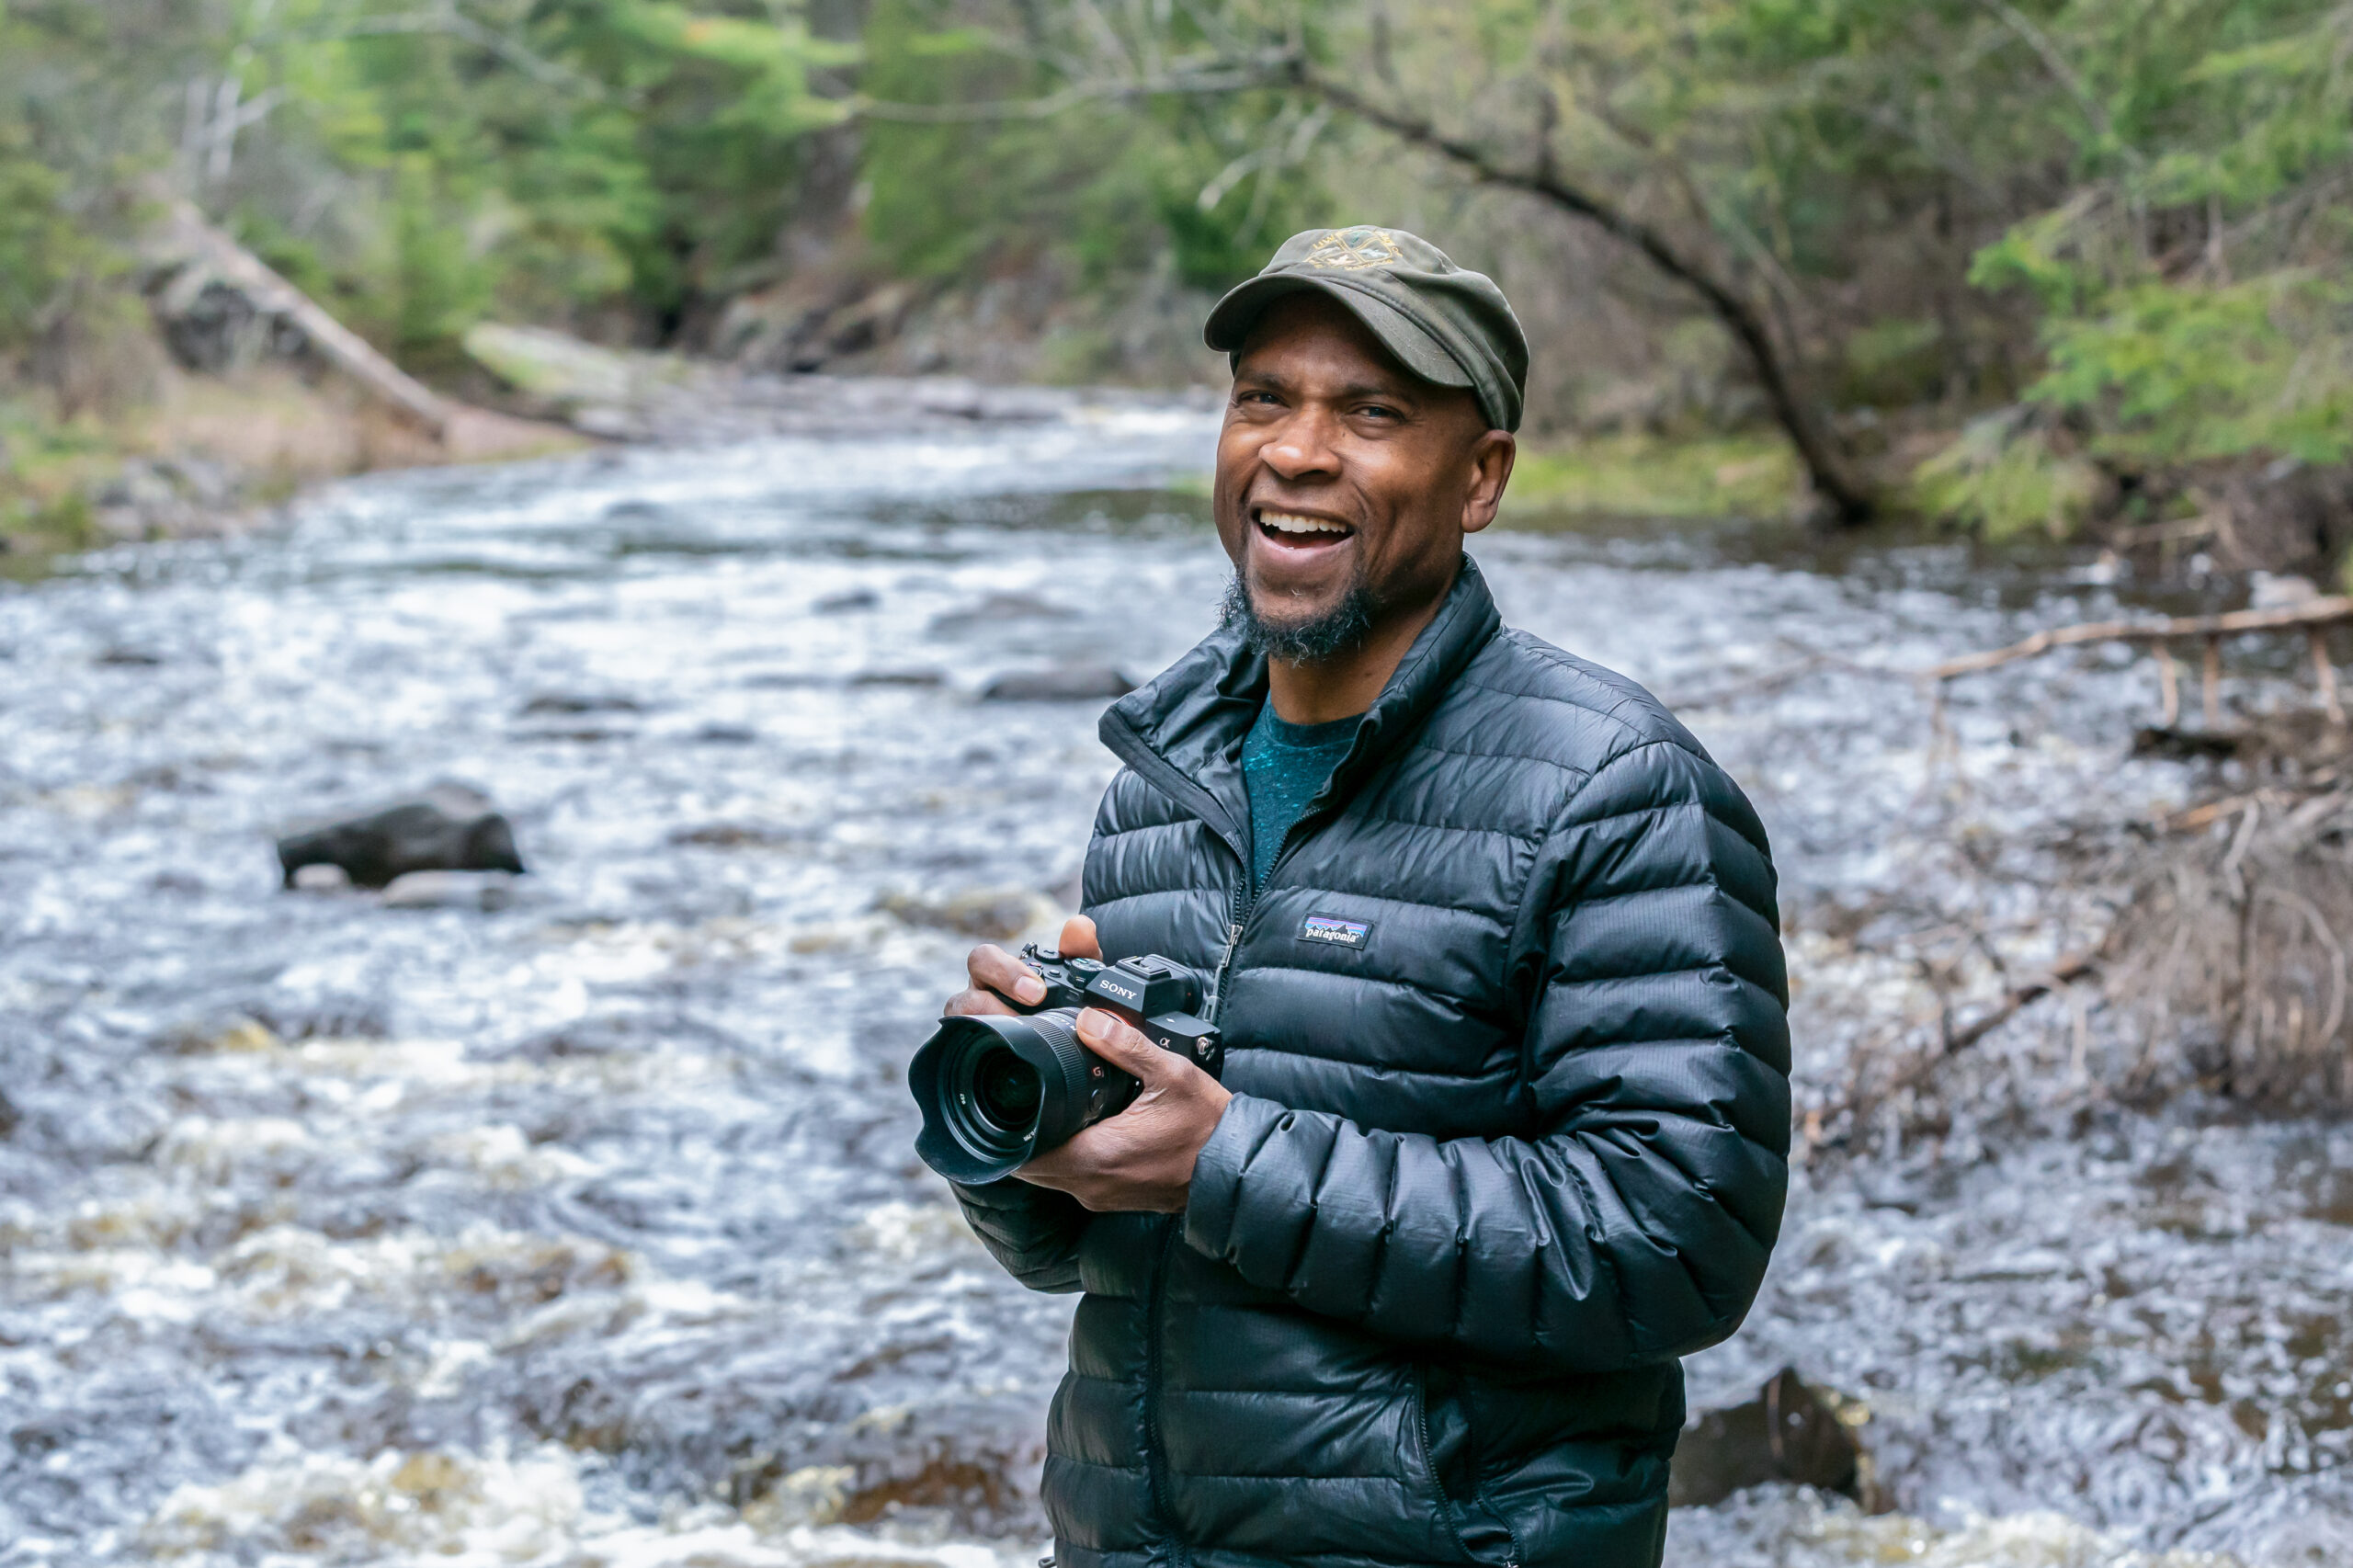 Dudley stands in front of a river smiling with his camera.